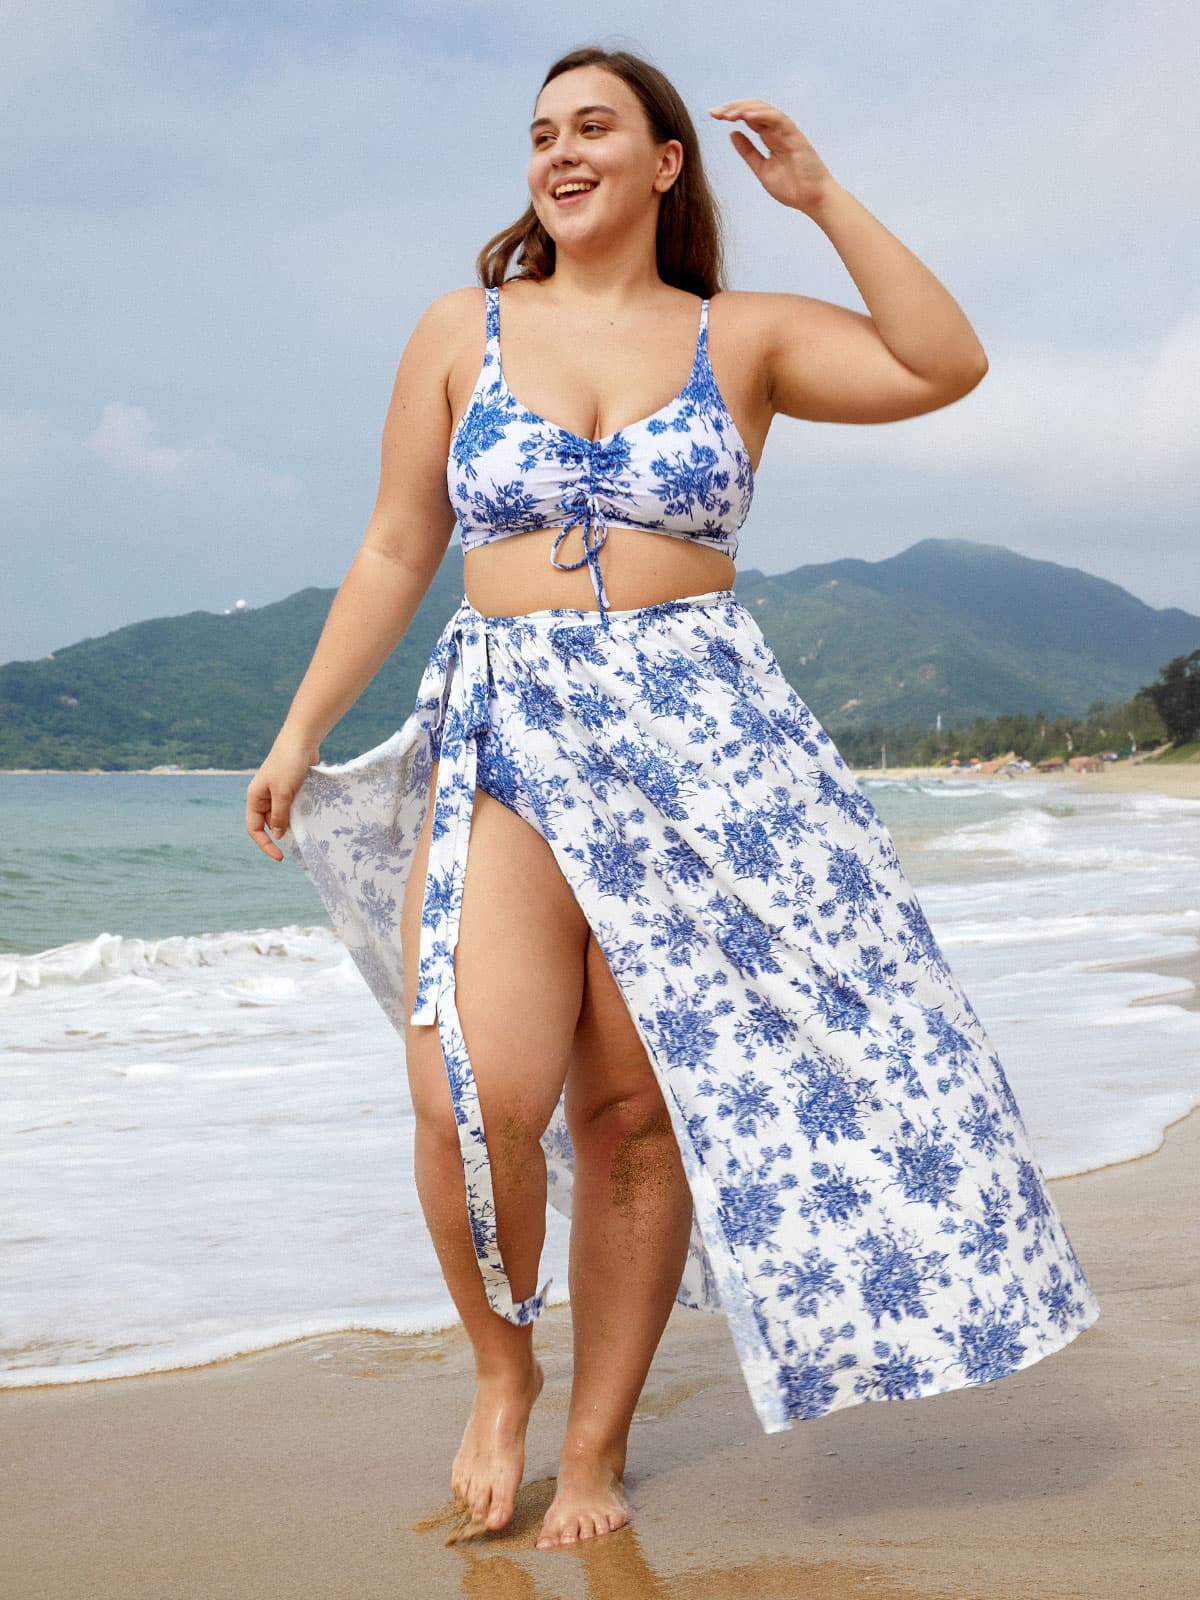 Plus Size Cover Ups